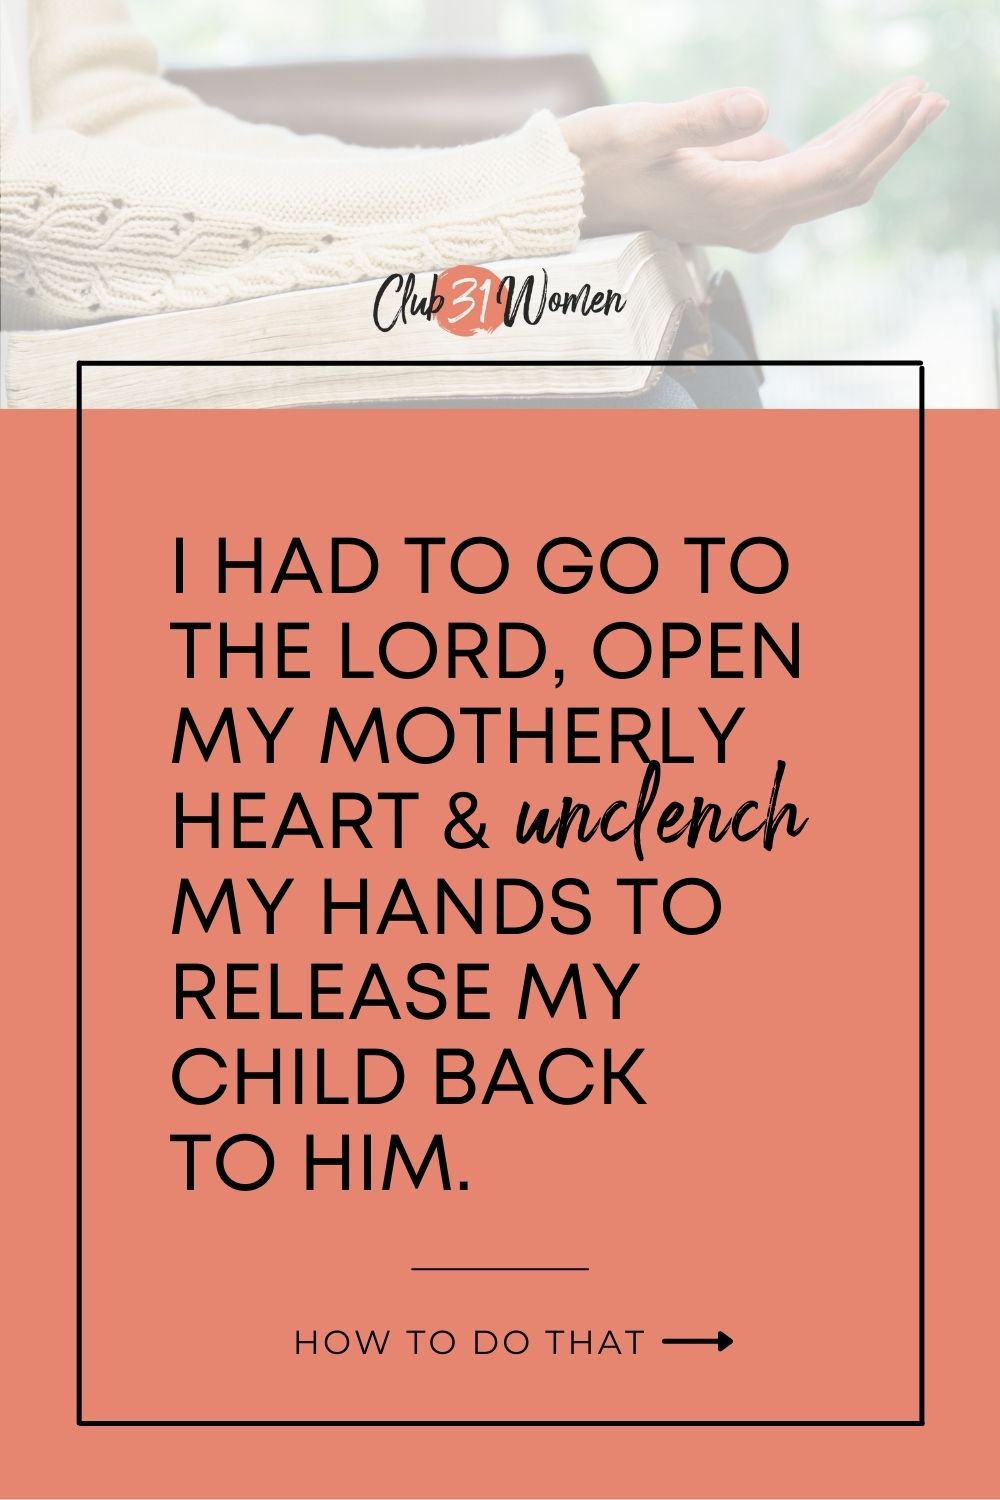 When things aren't going according to our plans, we need to release our grip and trust God with it all. He sees and knows more than we do. via @Club31Women